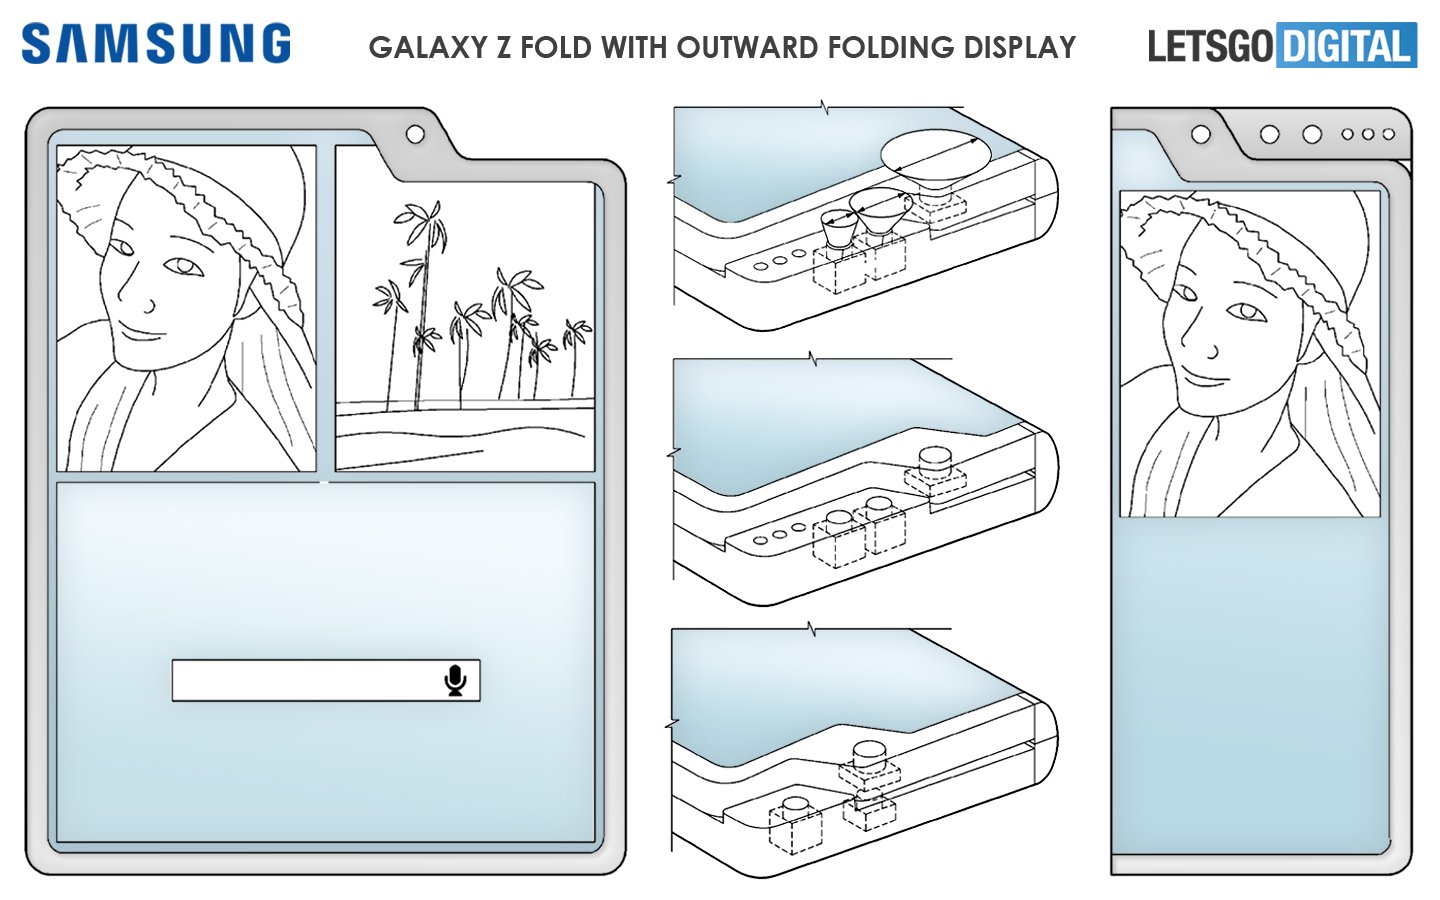 Samsung patents three foldable smartphone designs with cutout for inner cameras